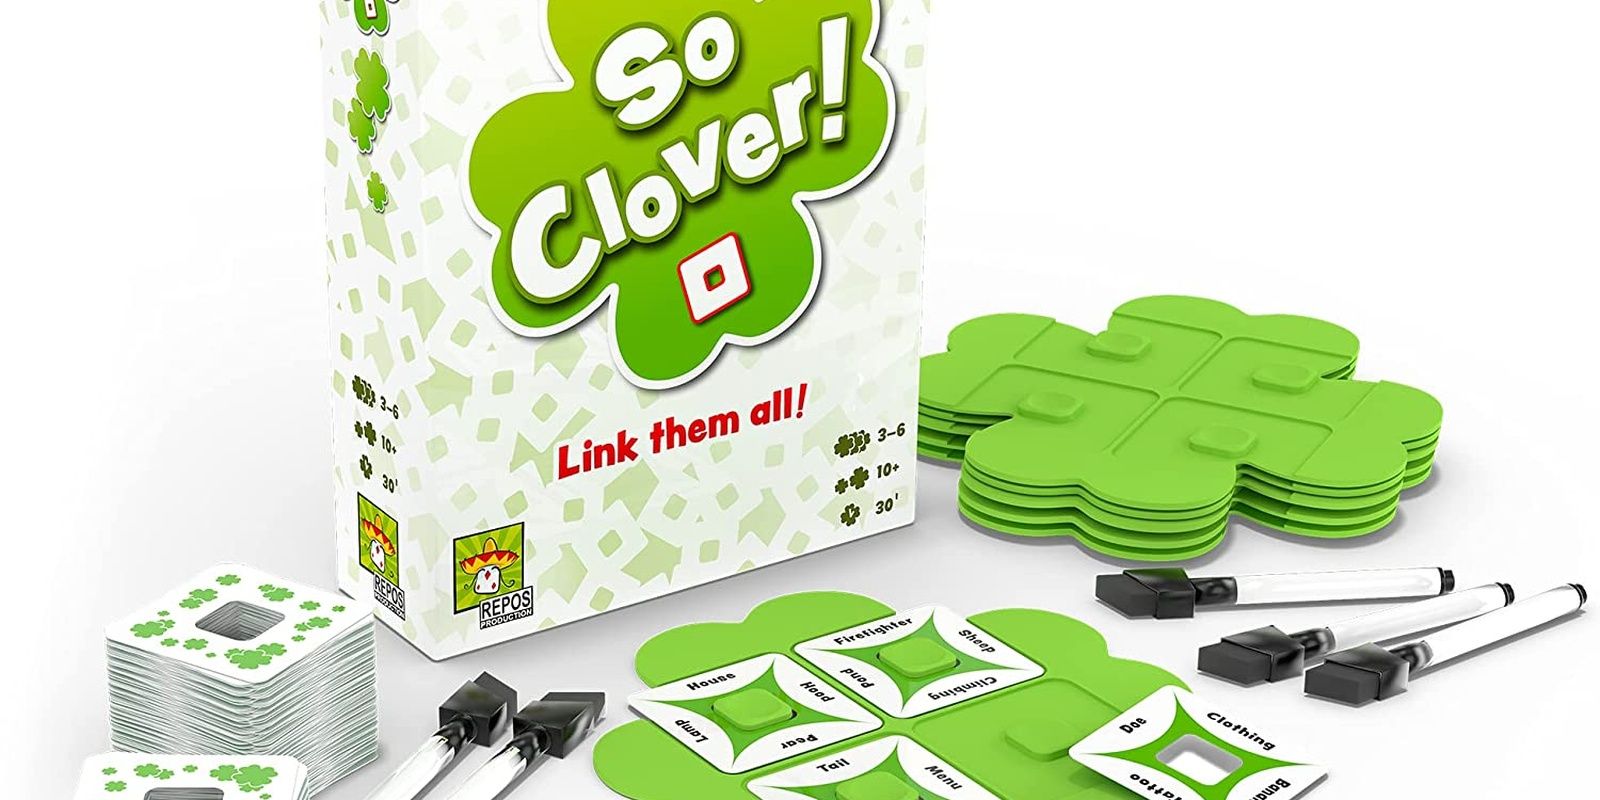 So Clover Board Game Setup With Components